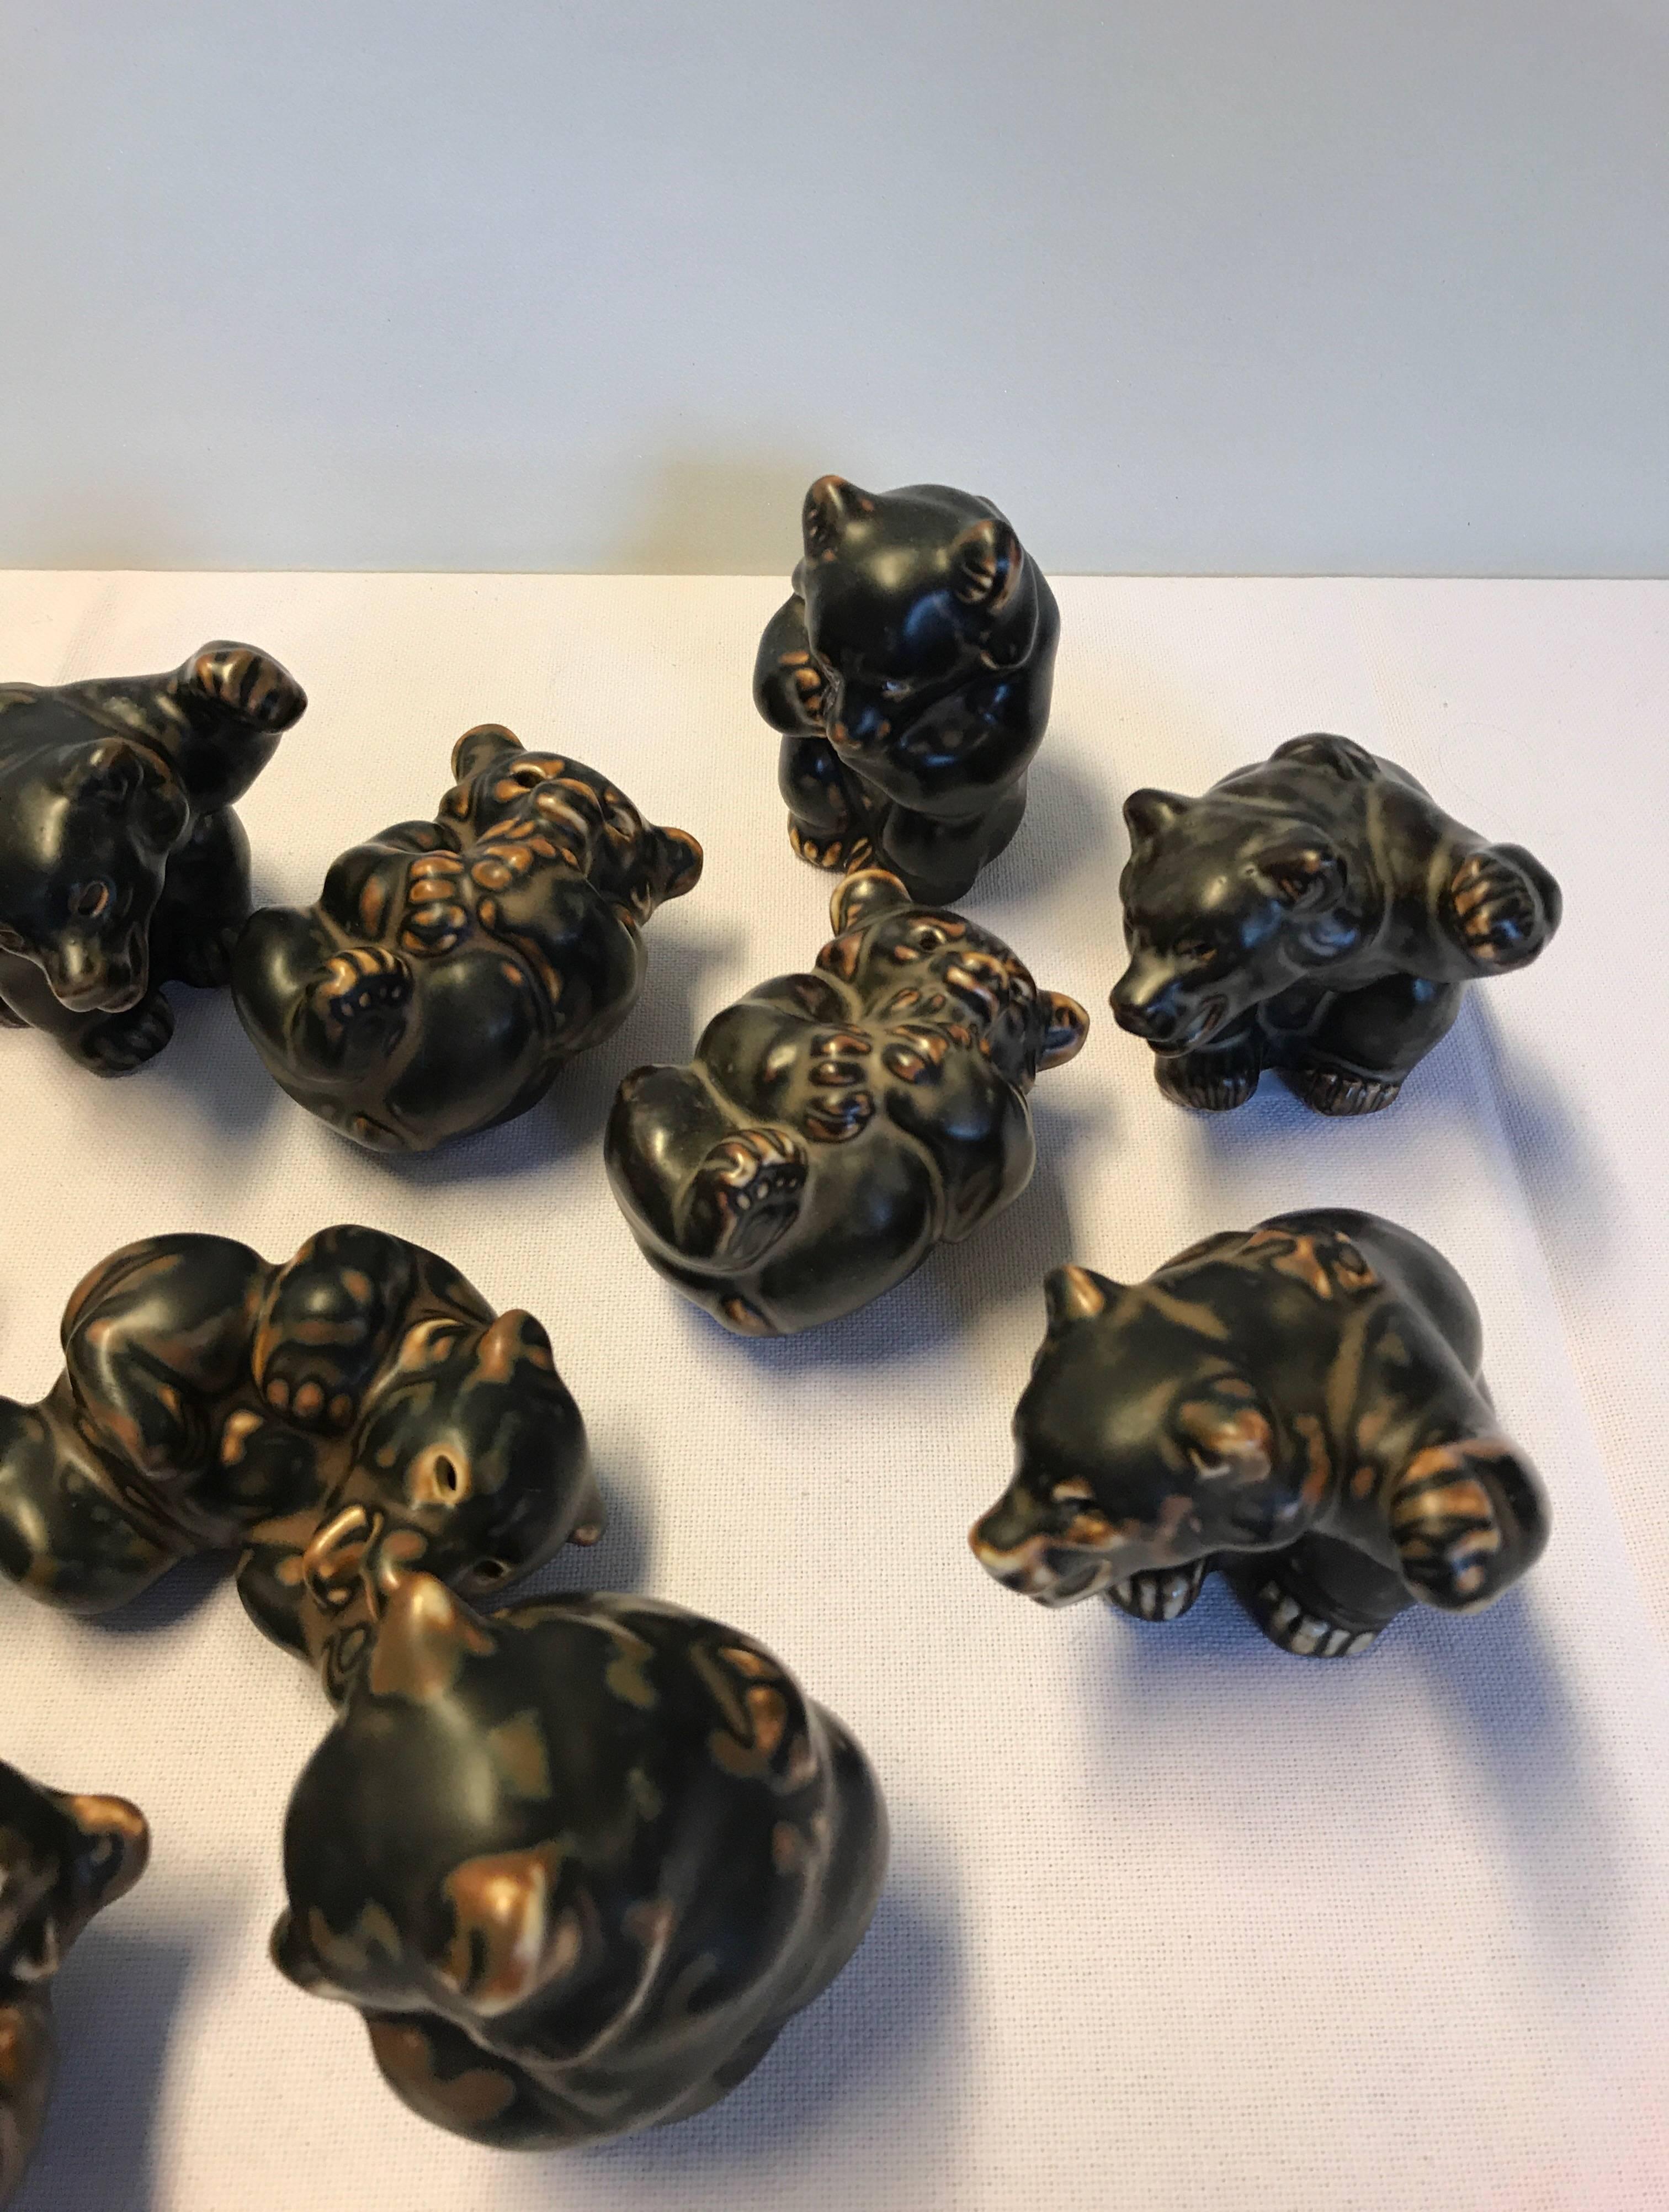 Collection of small Knud Kyhn bears for Royal Copenhagen, 17 pieces. 1970s, Denmark. Measures: Depth 6 cm, width 9 cm, height 6 cm., in very good condition. Per item 79 €, but if interested in all 17 items/bears, send message for offer.